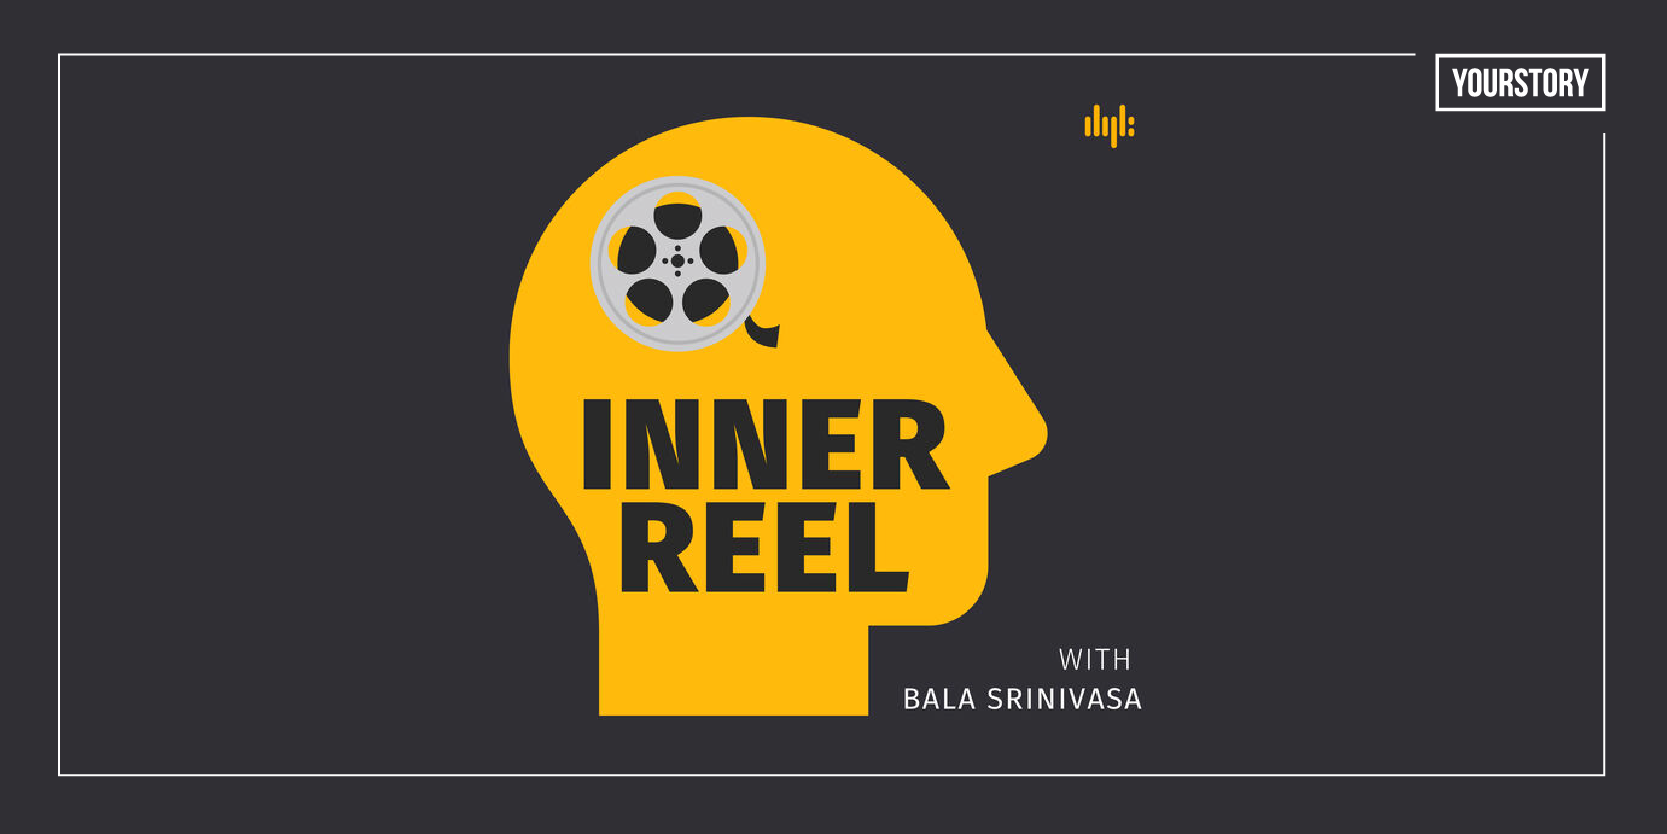 Inner journeys that make a person with Bala Srinivasa: A podcast you never knew you needed 

